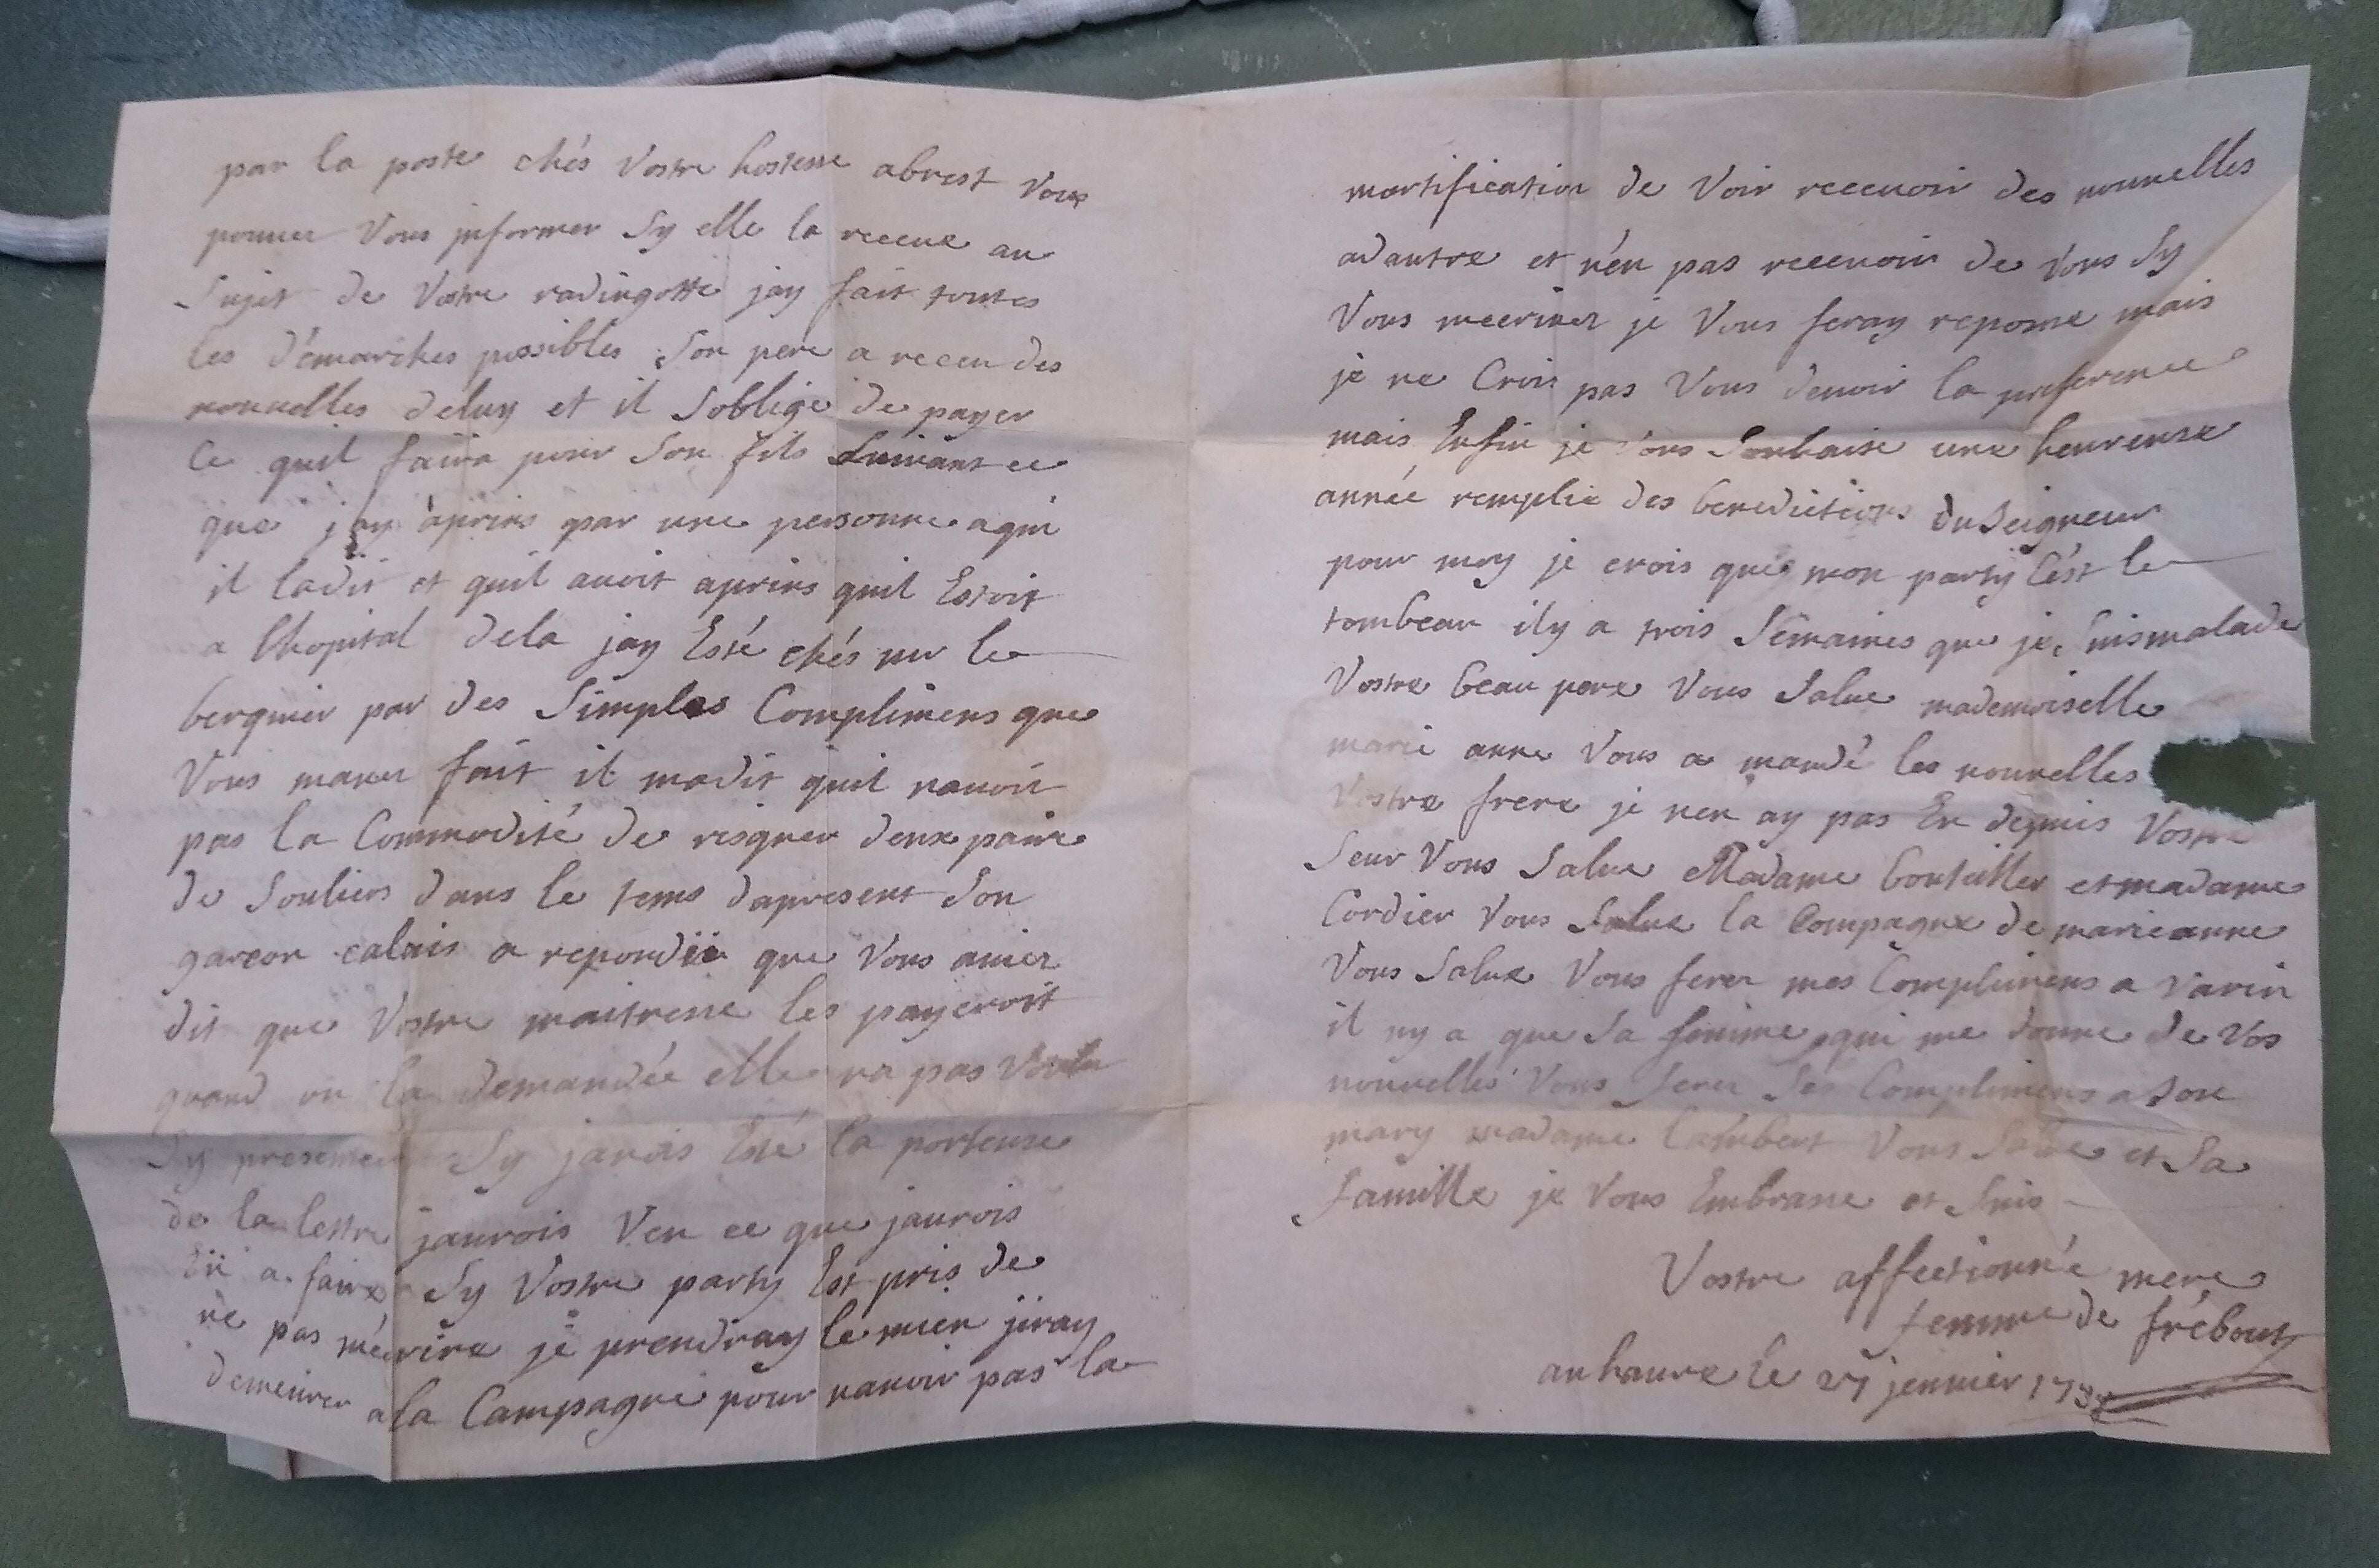 The letter from Marguerite Quesnel to her son Nicolas Quesnel dated 27 January 1758